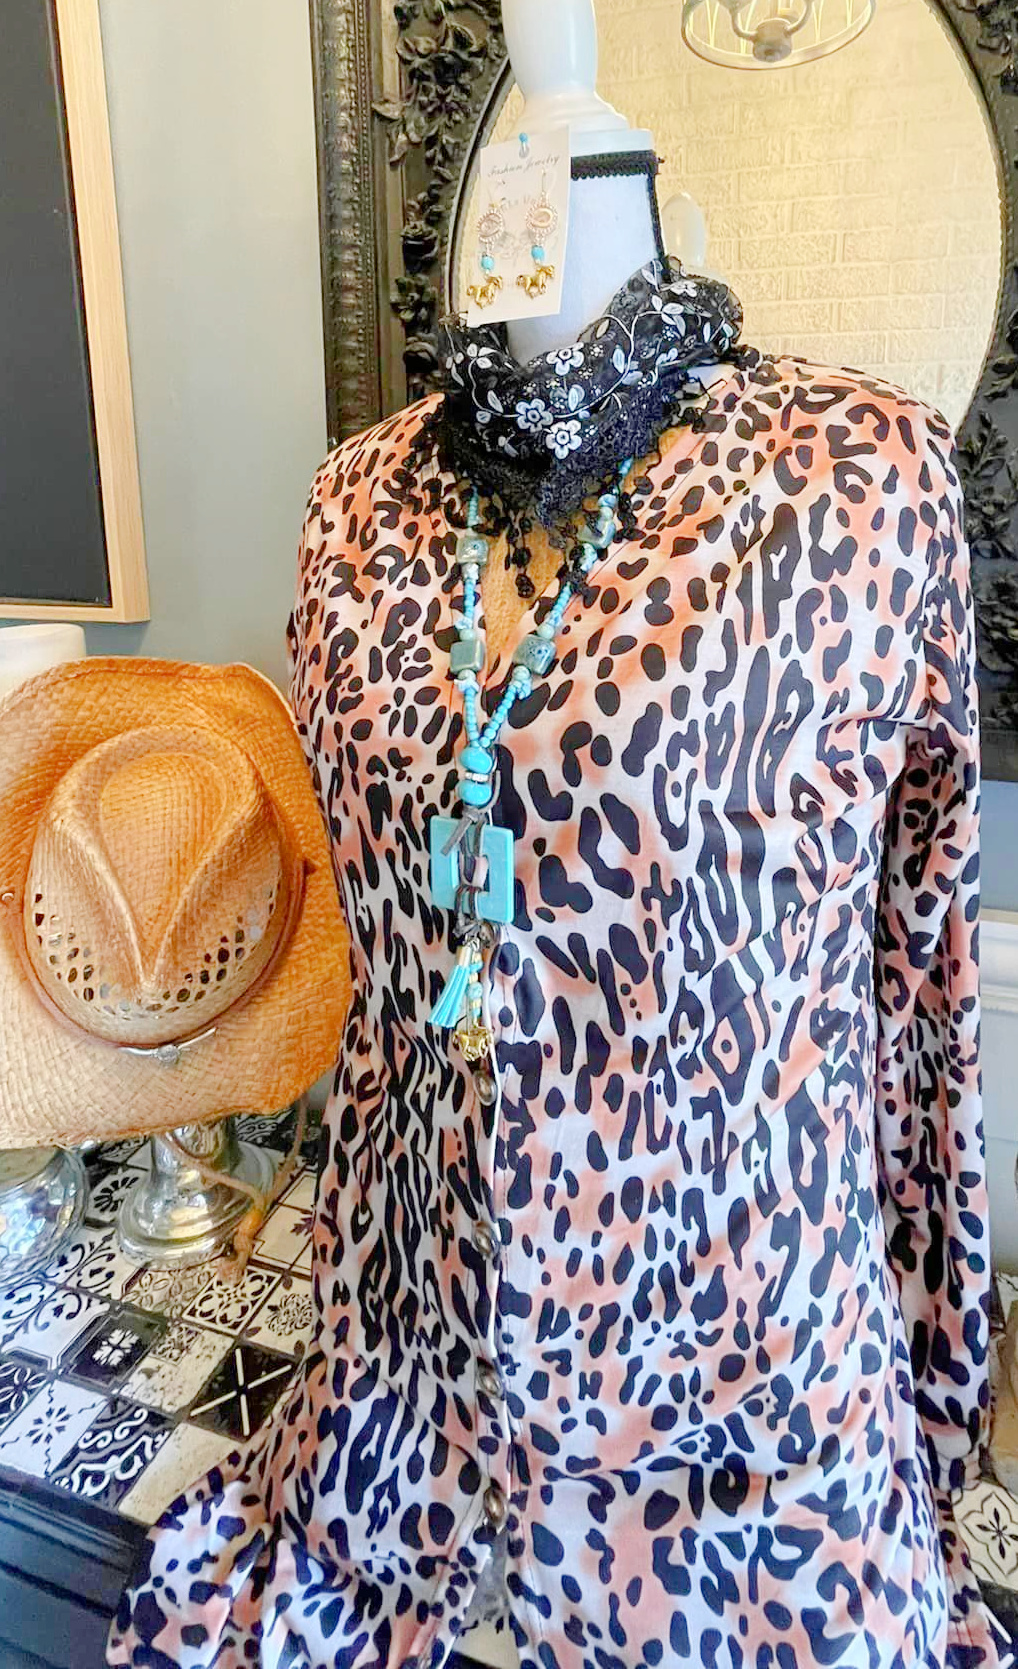 ON THE PROWL CARDI Tan Brown & Black Leopard Long Sleeve Button Front Cardigan ONLY 2 LEFT L & XL